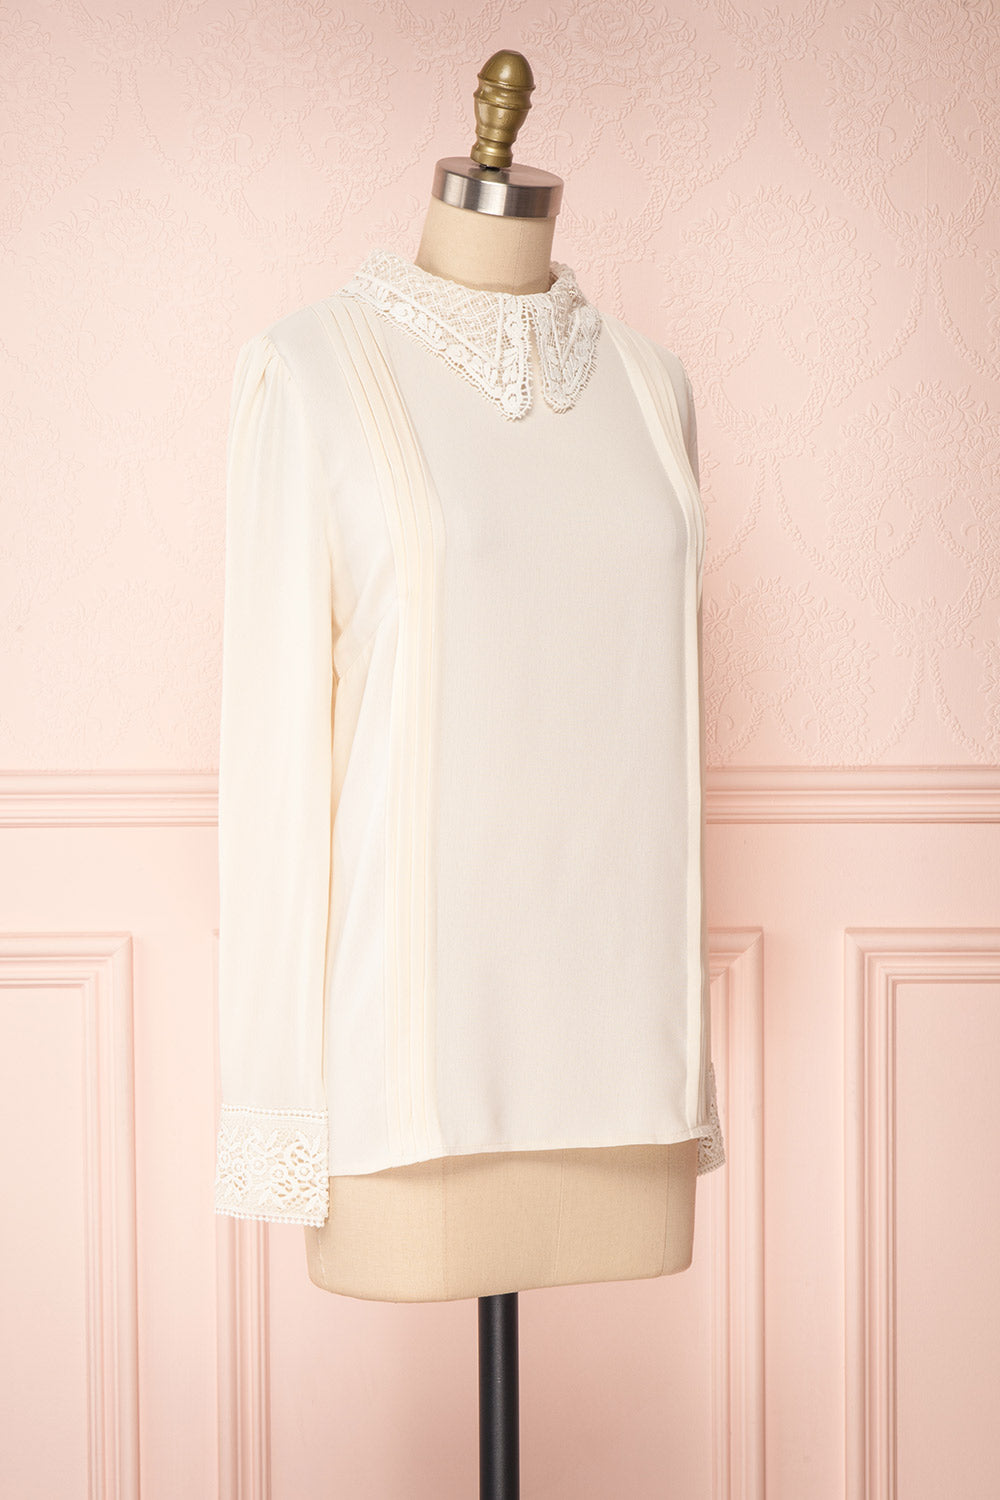 Edel Beige Blouse with Lace Collar | Boutique 1861 side view 